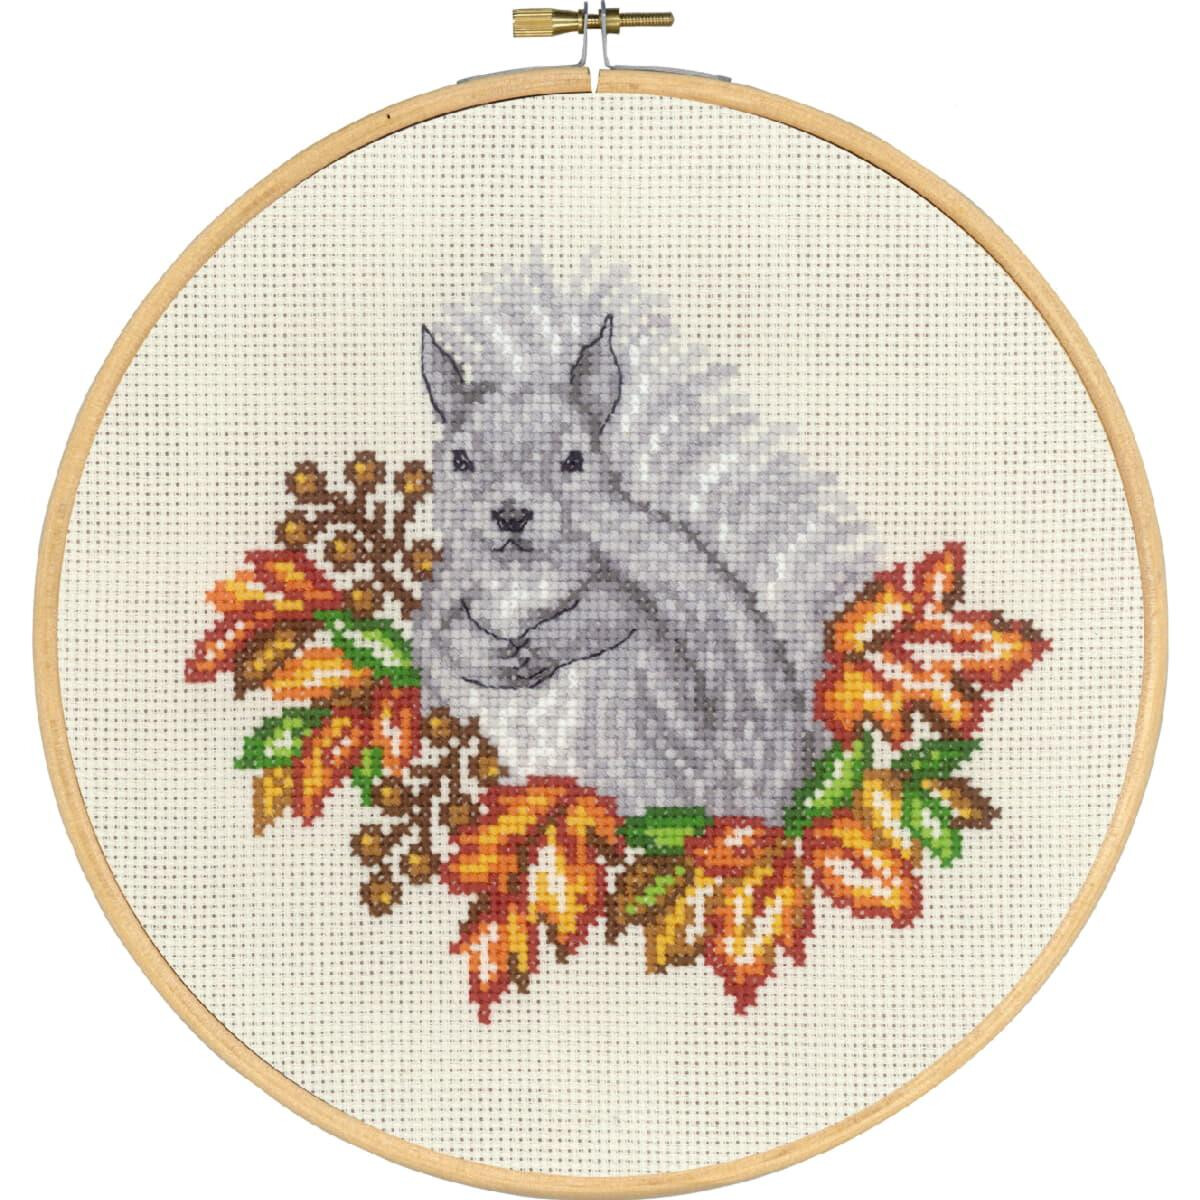 Permin counted cross stitch kit with hoop "Squirrel...